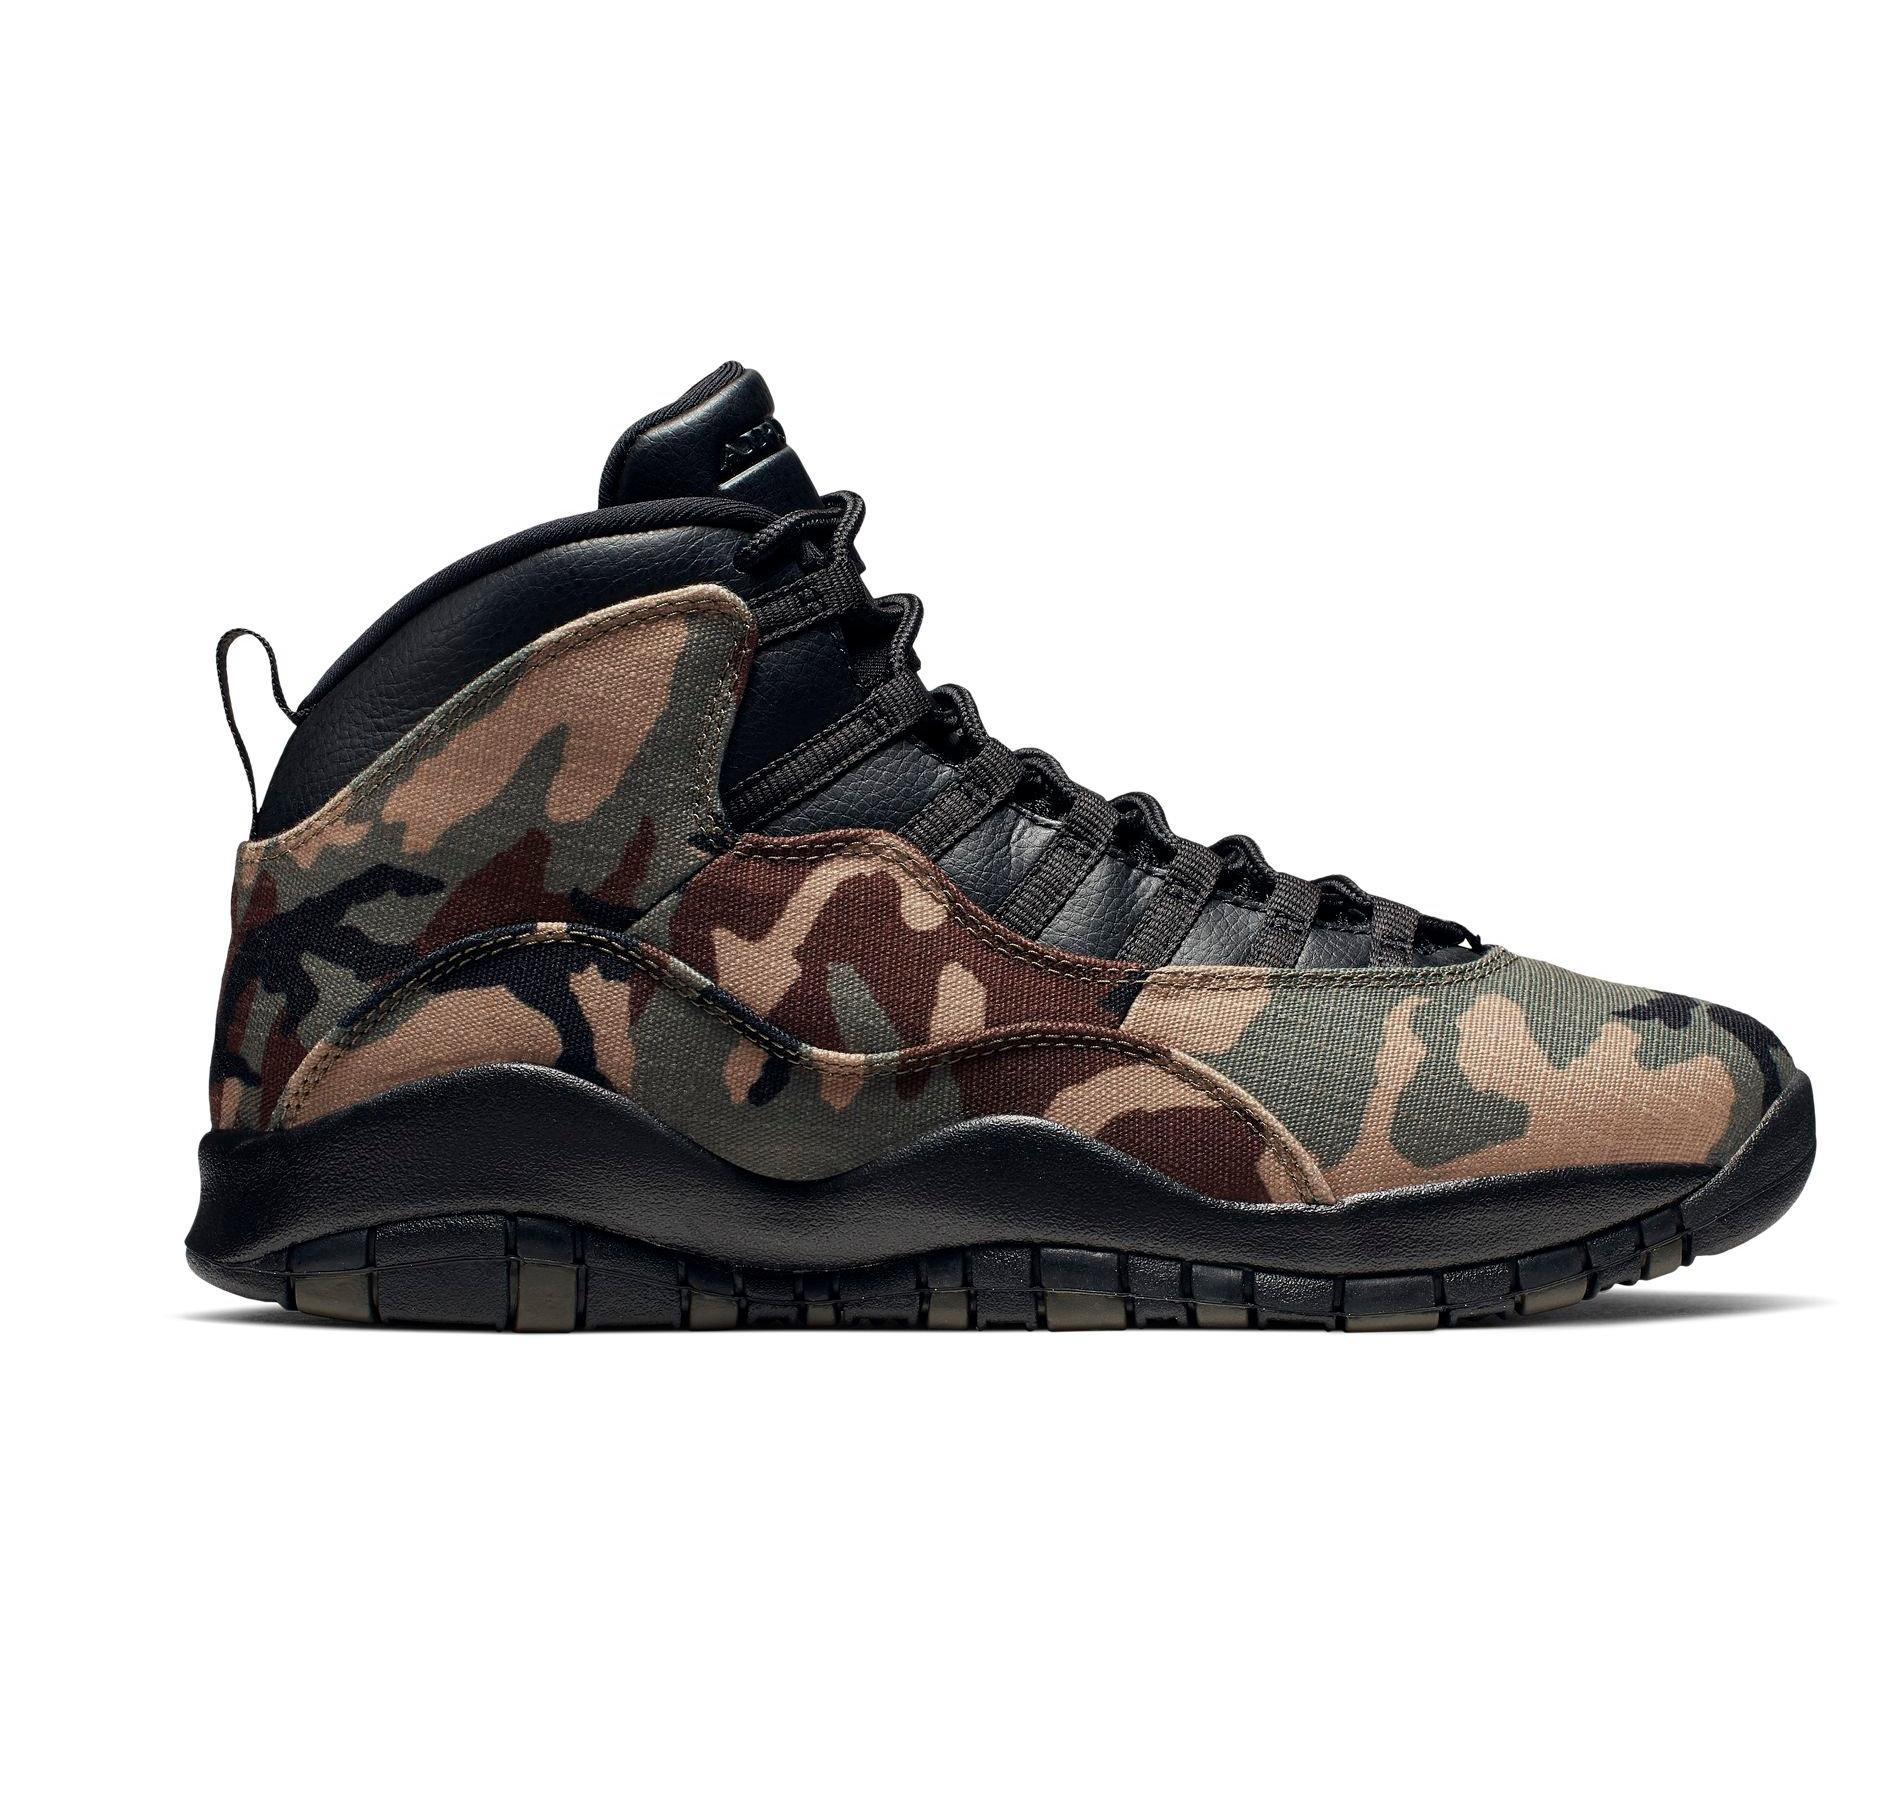 Along with the launch of the Air Jordan 10 Woodland Camo kicks comes a look  at some of the best